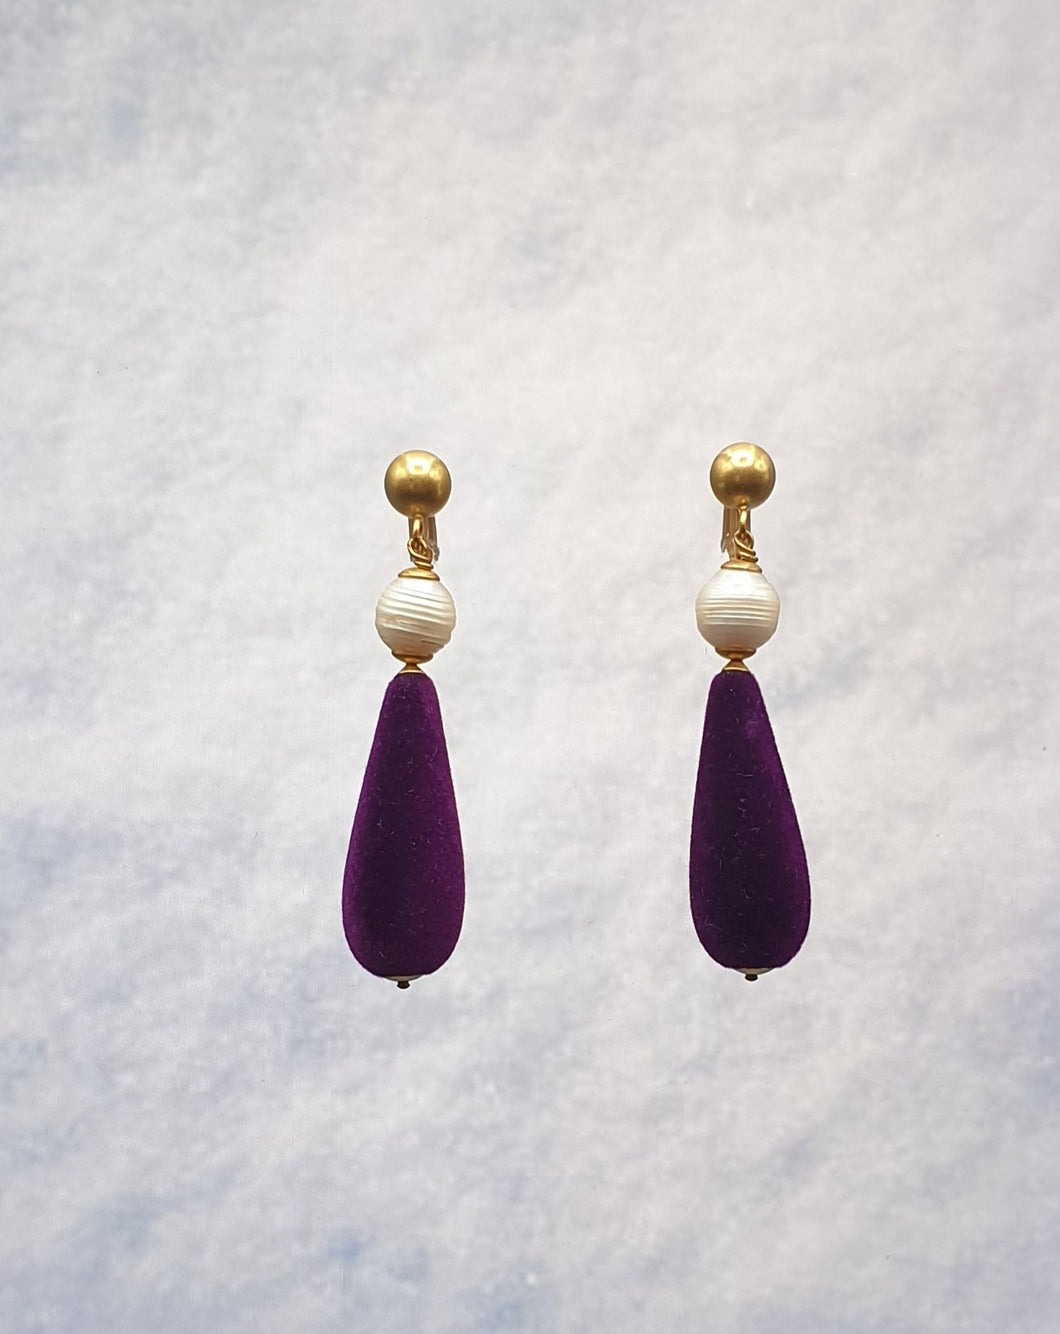 golden metal clip-on earrings with pearl and purple velvet drop